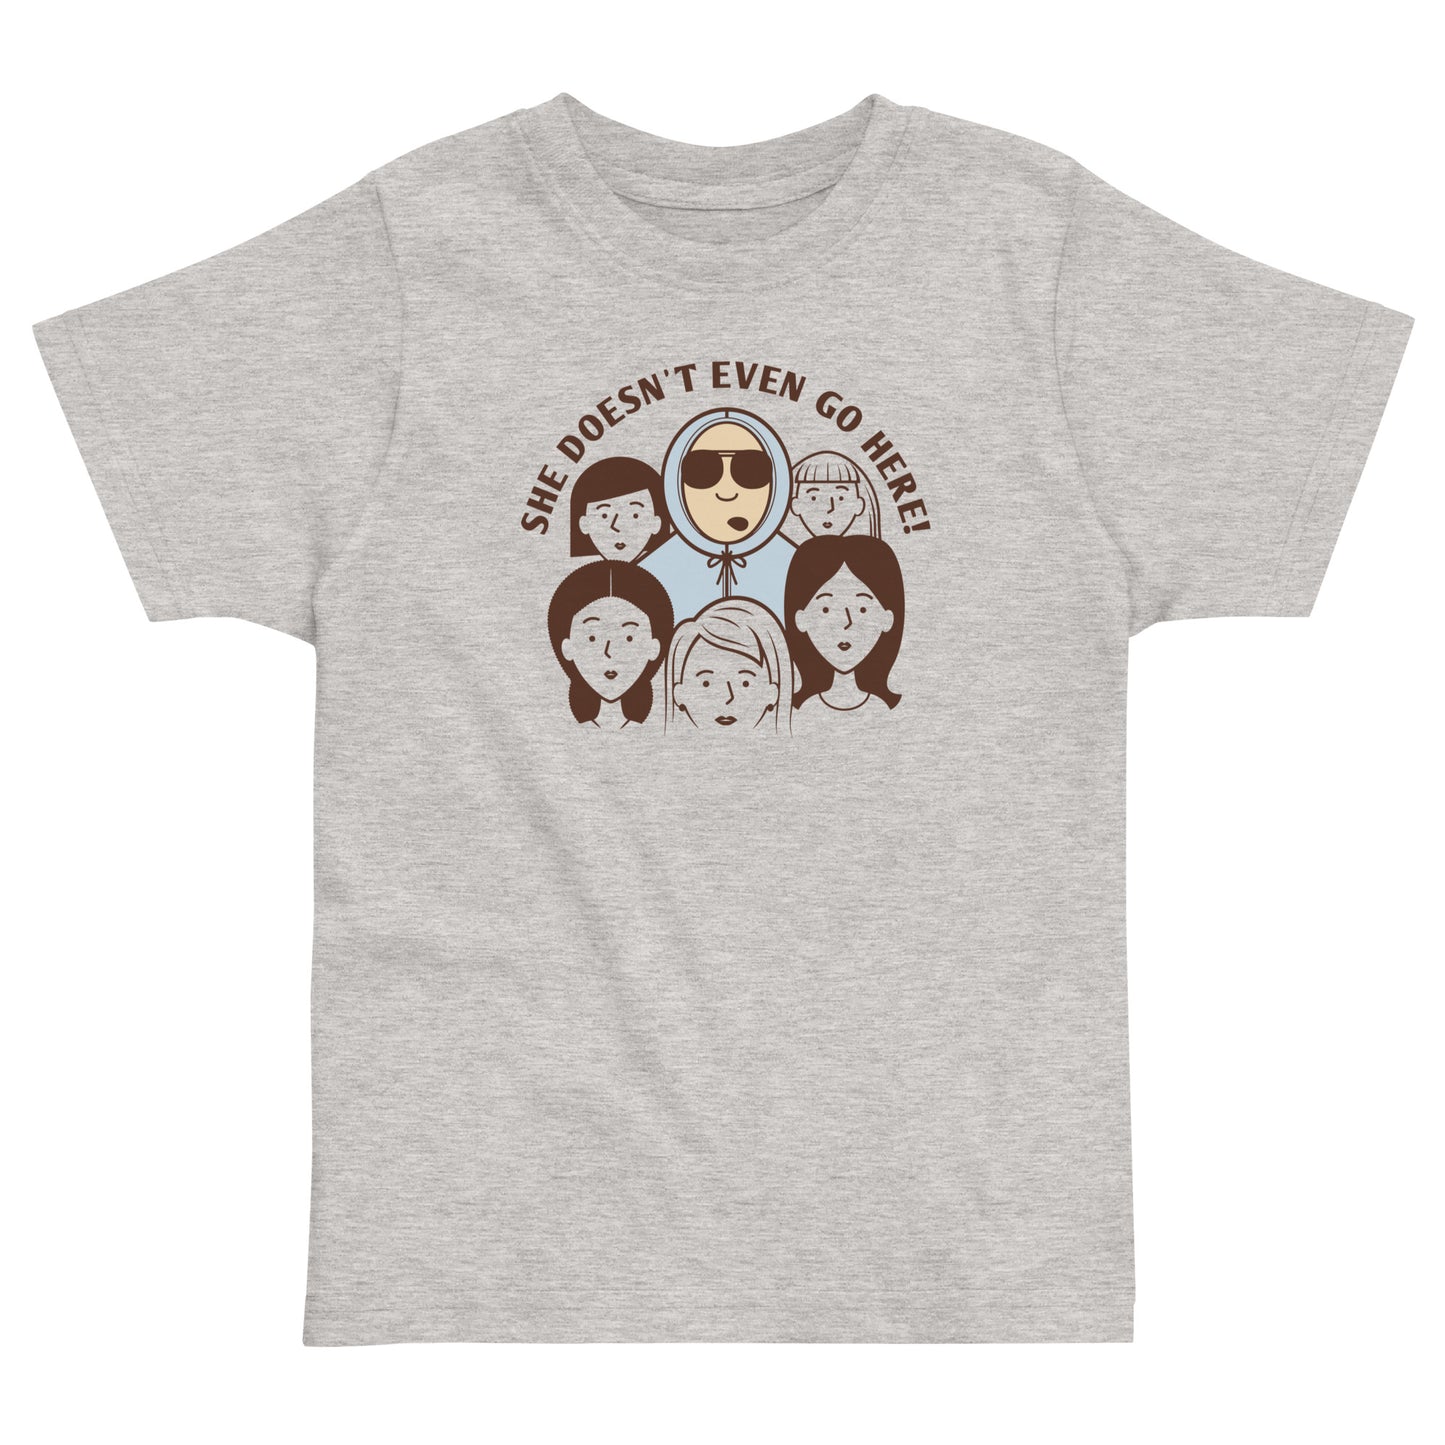 She Doesn't Even Go Here! Kid's Toddler Tee